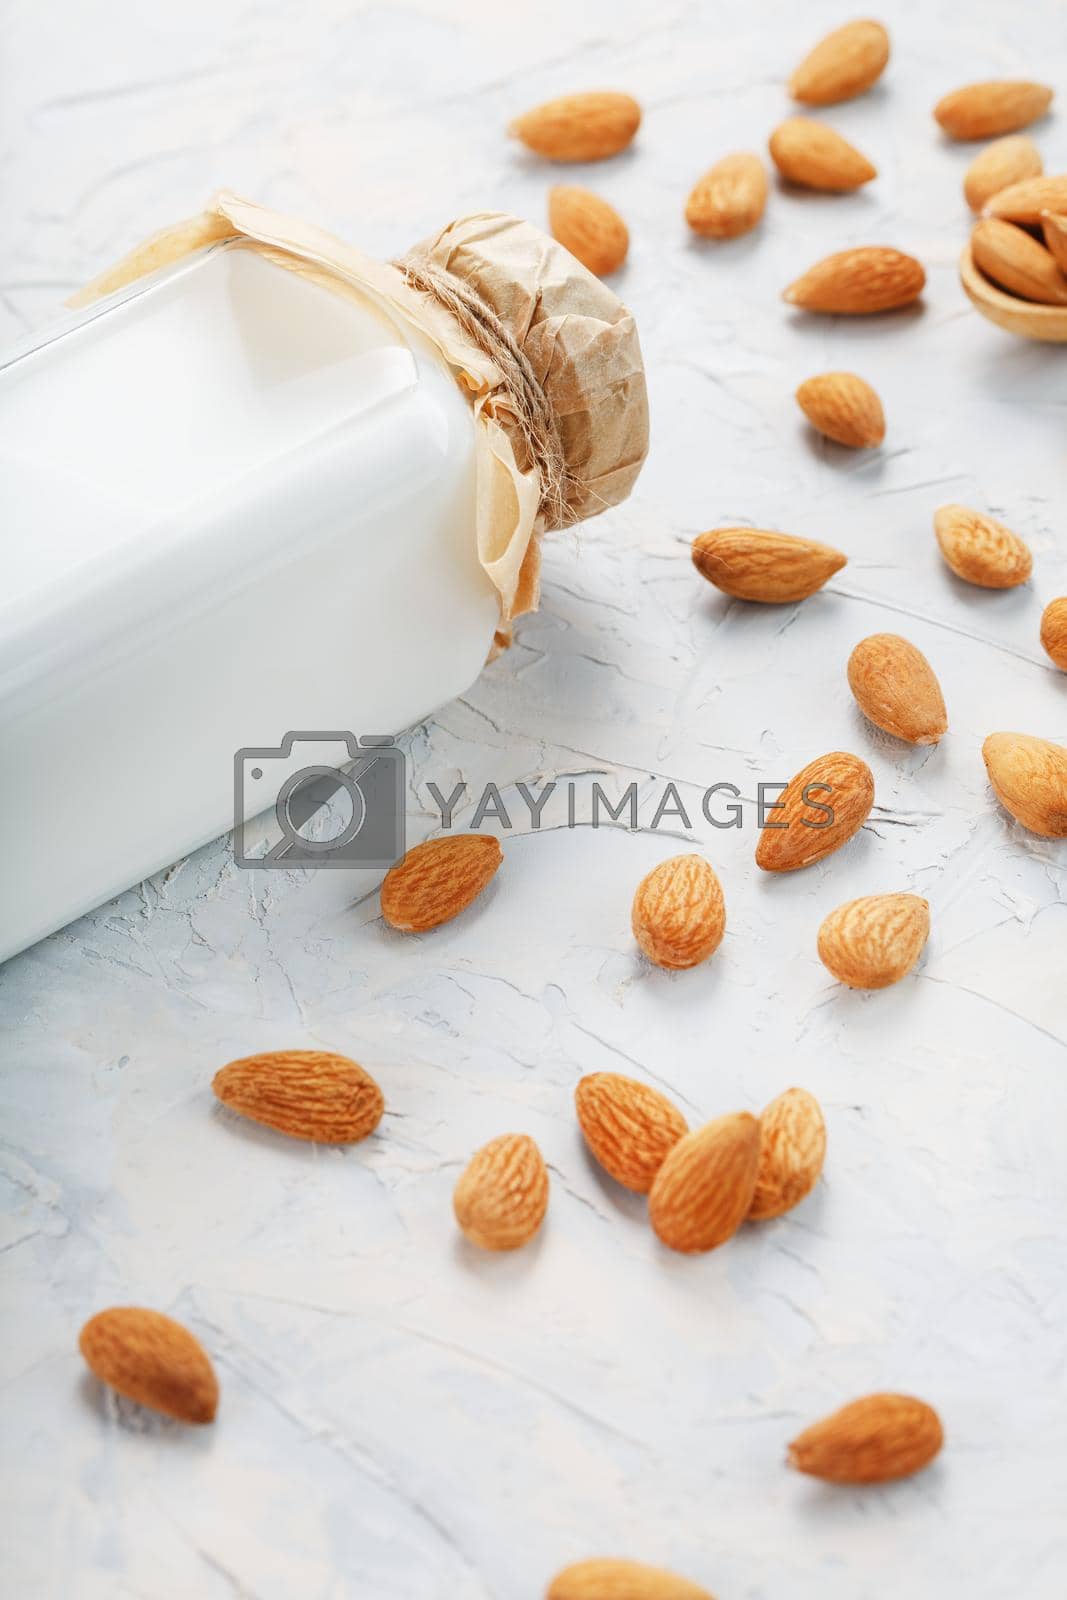 Royalty free image of Almond milk in a glass bottle on a light background with a scattering of seed kernels and a wooden spoon. by AlexGrec